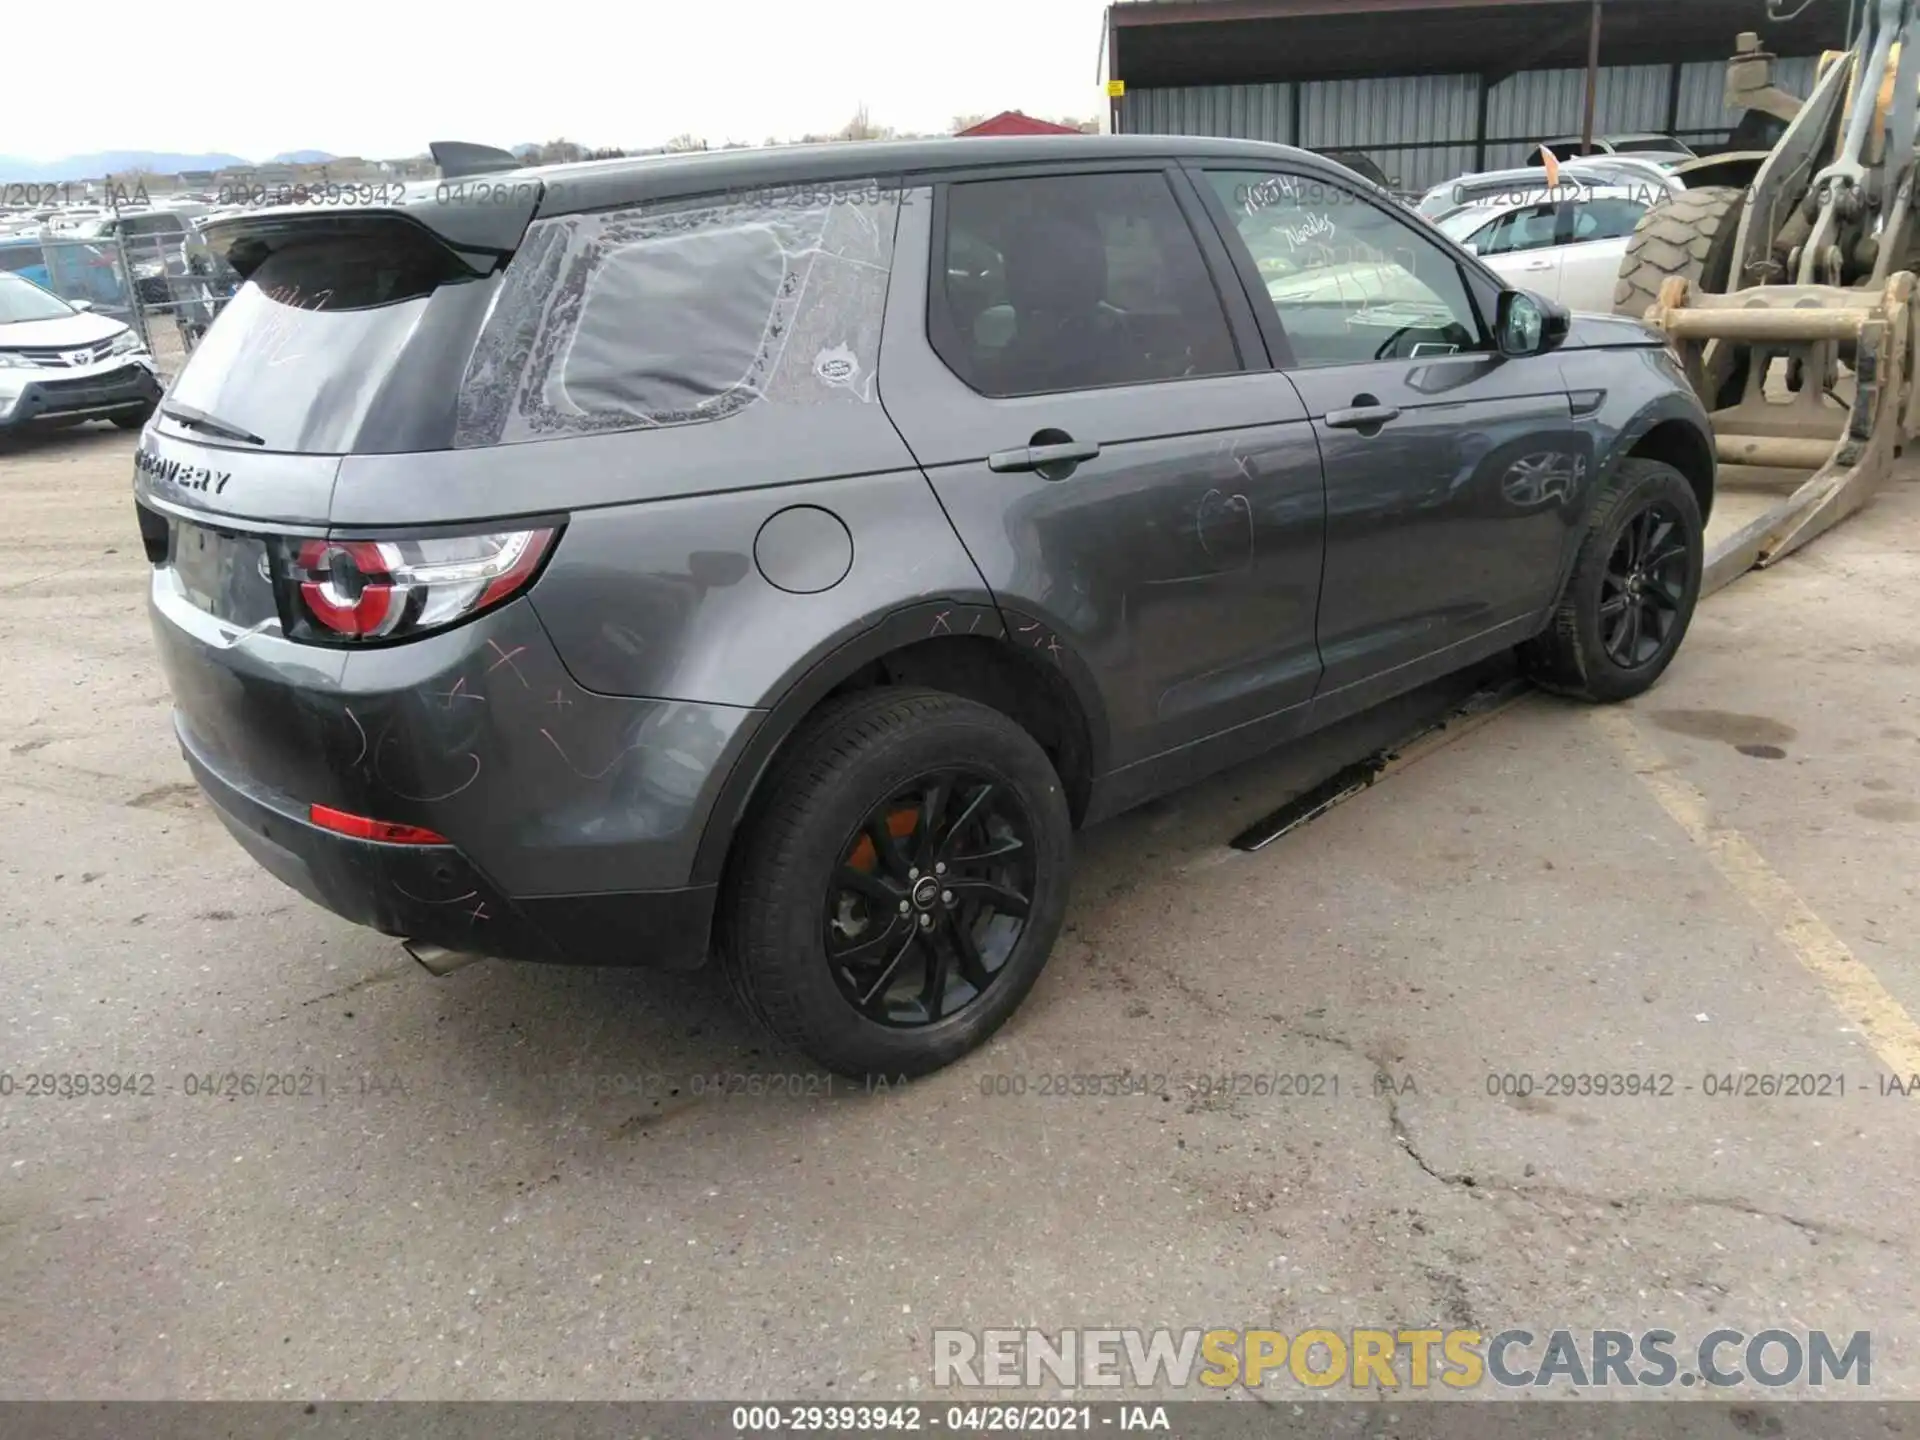 4 Photograph of a damaged car SALCP2FX9KH795815 LAND ROVER DISCOVERY SPORT 2019